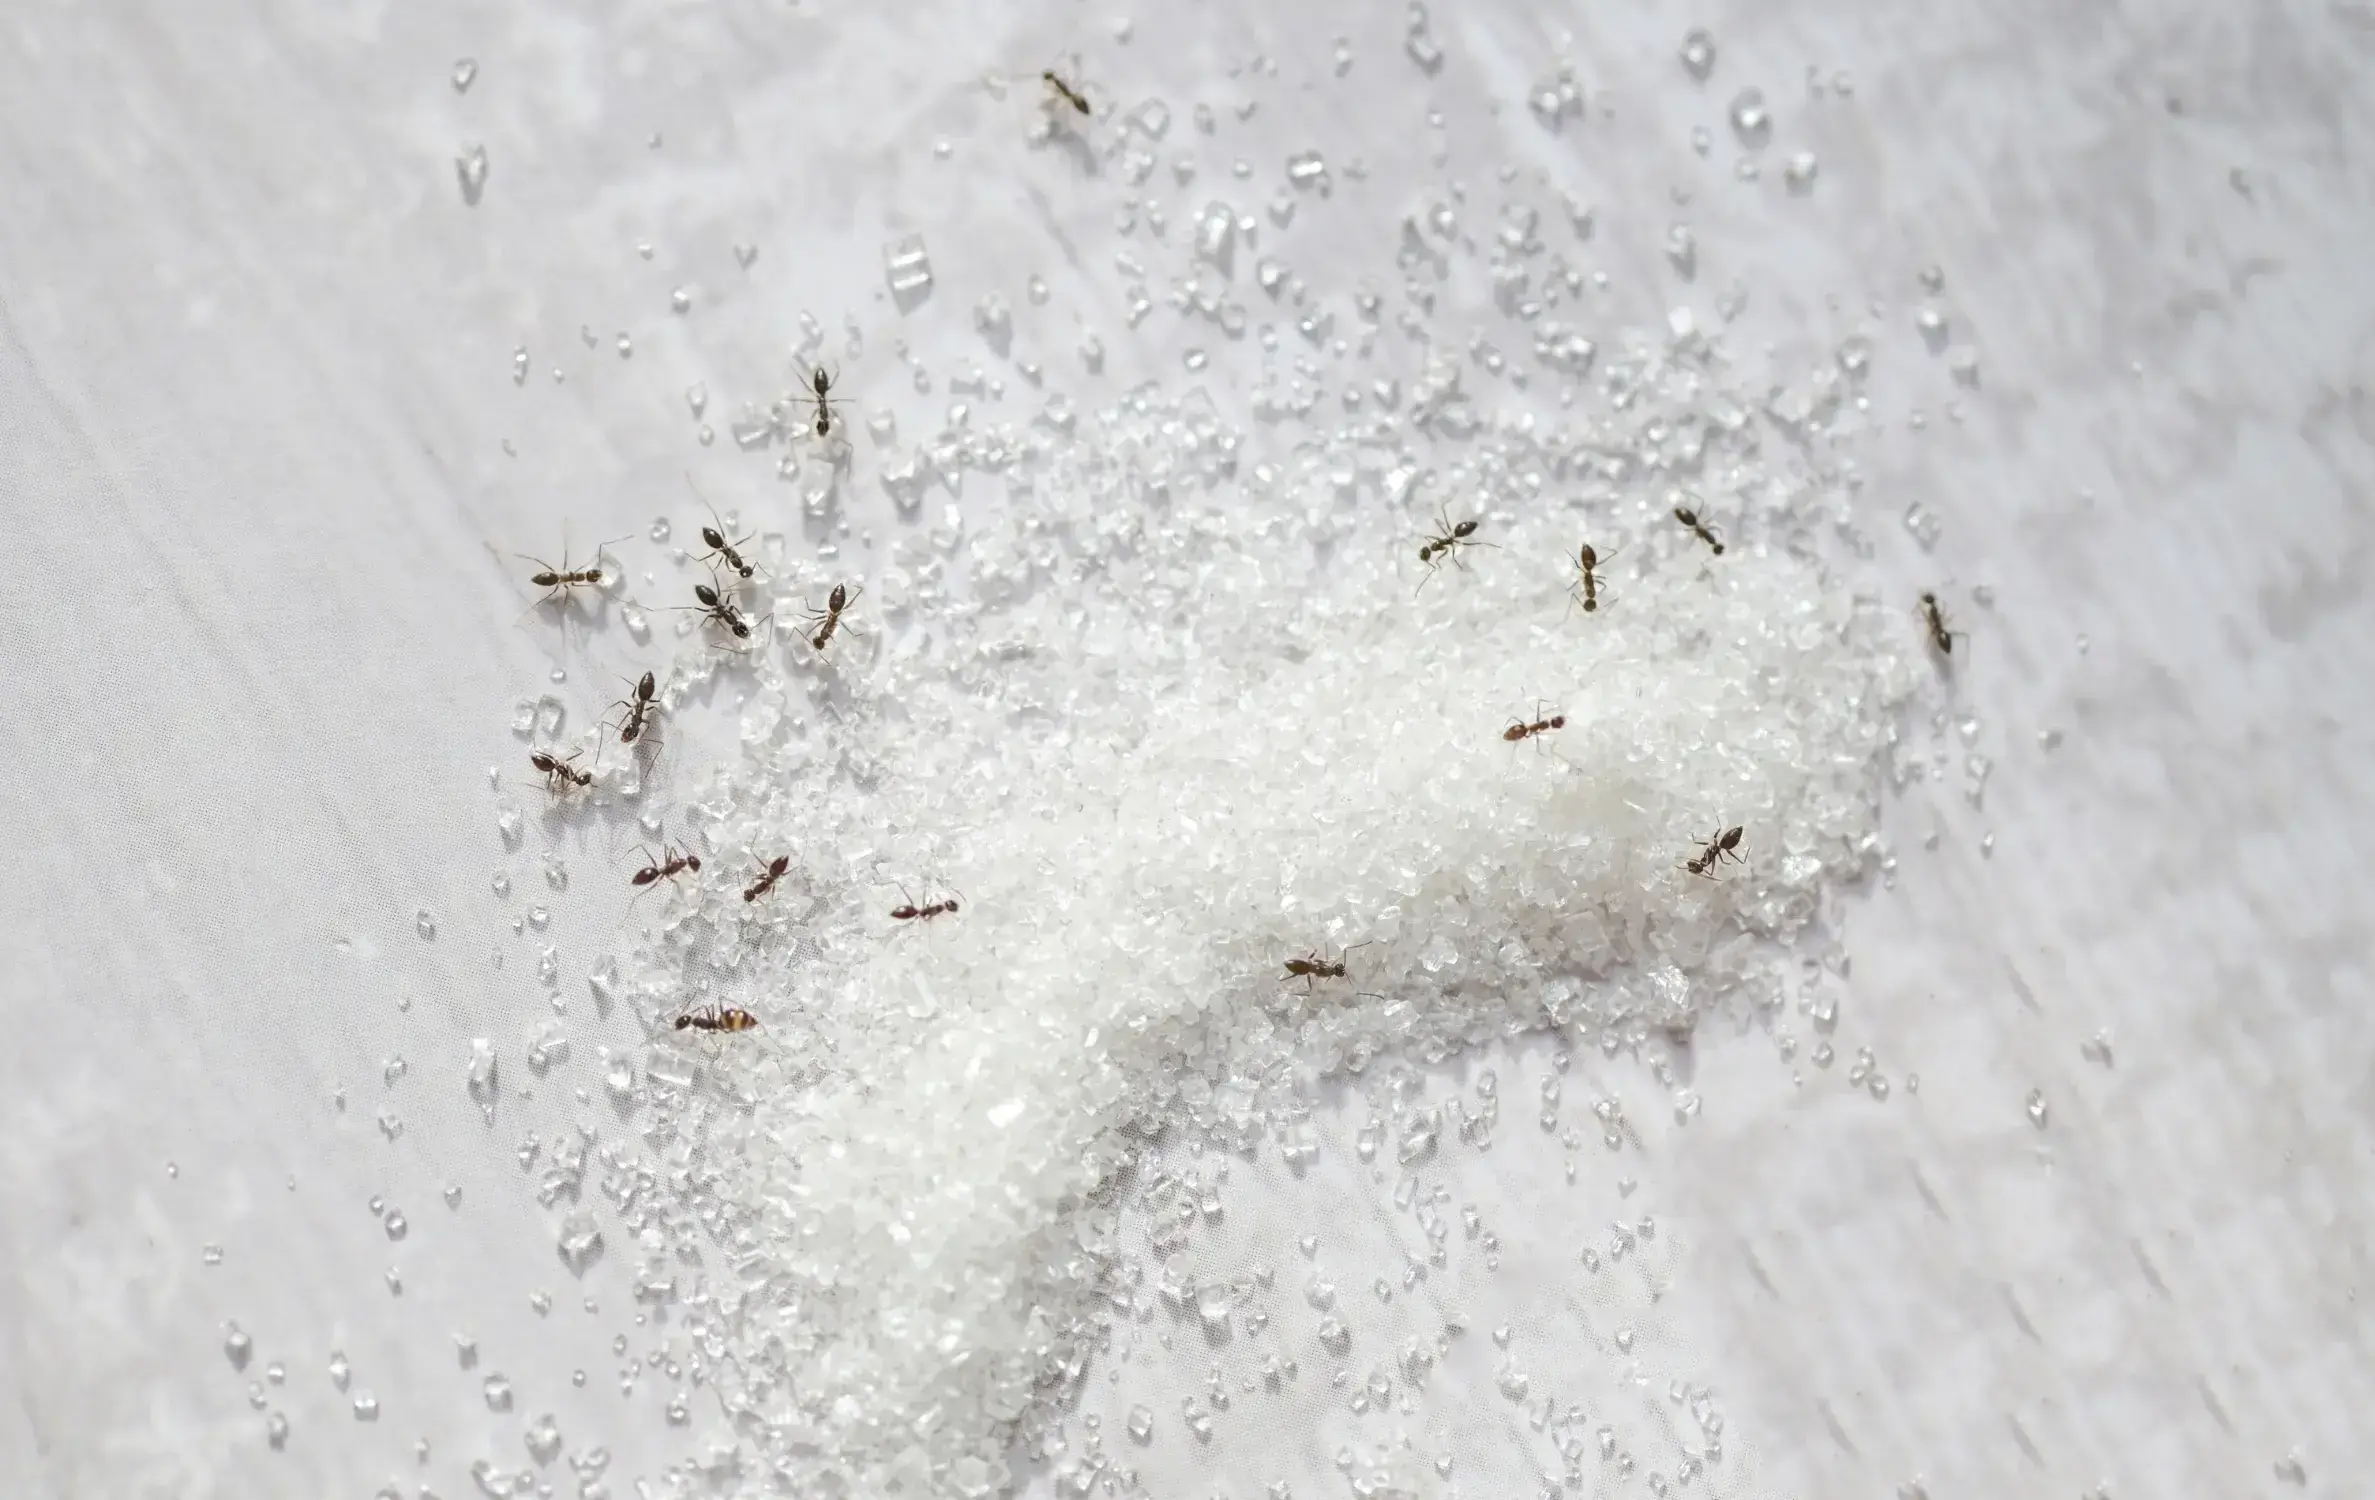 Sugar ant on table background, white sugar with ant eating sweet